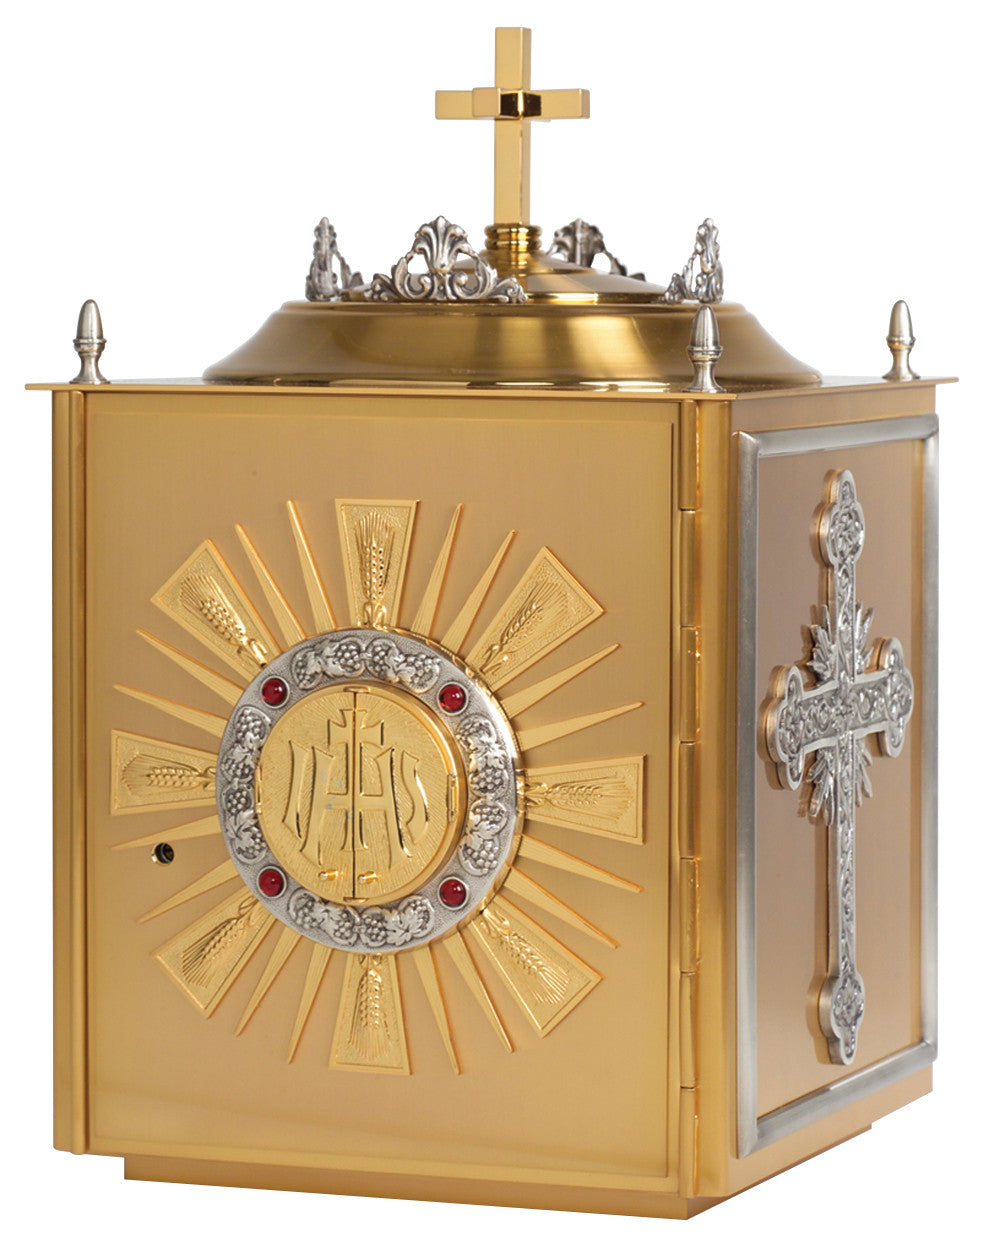 K672 EXPOSITION TABERNACLE